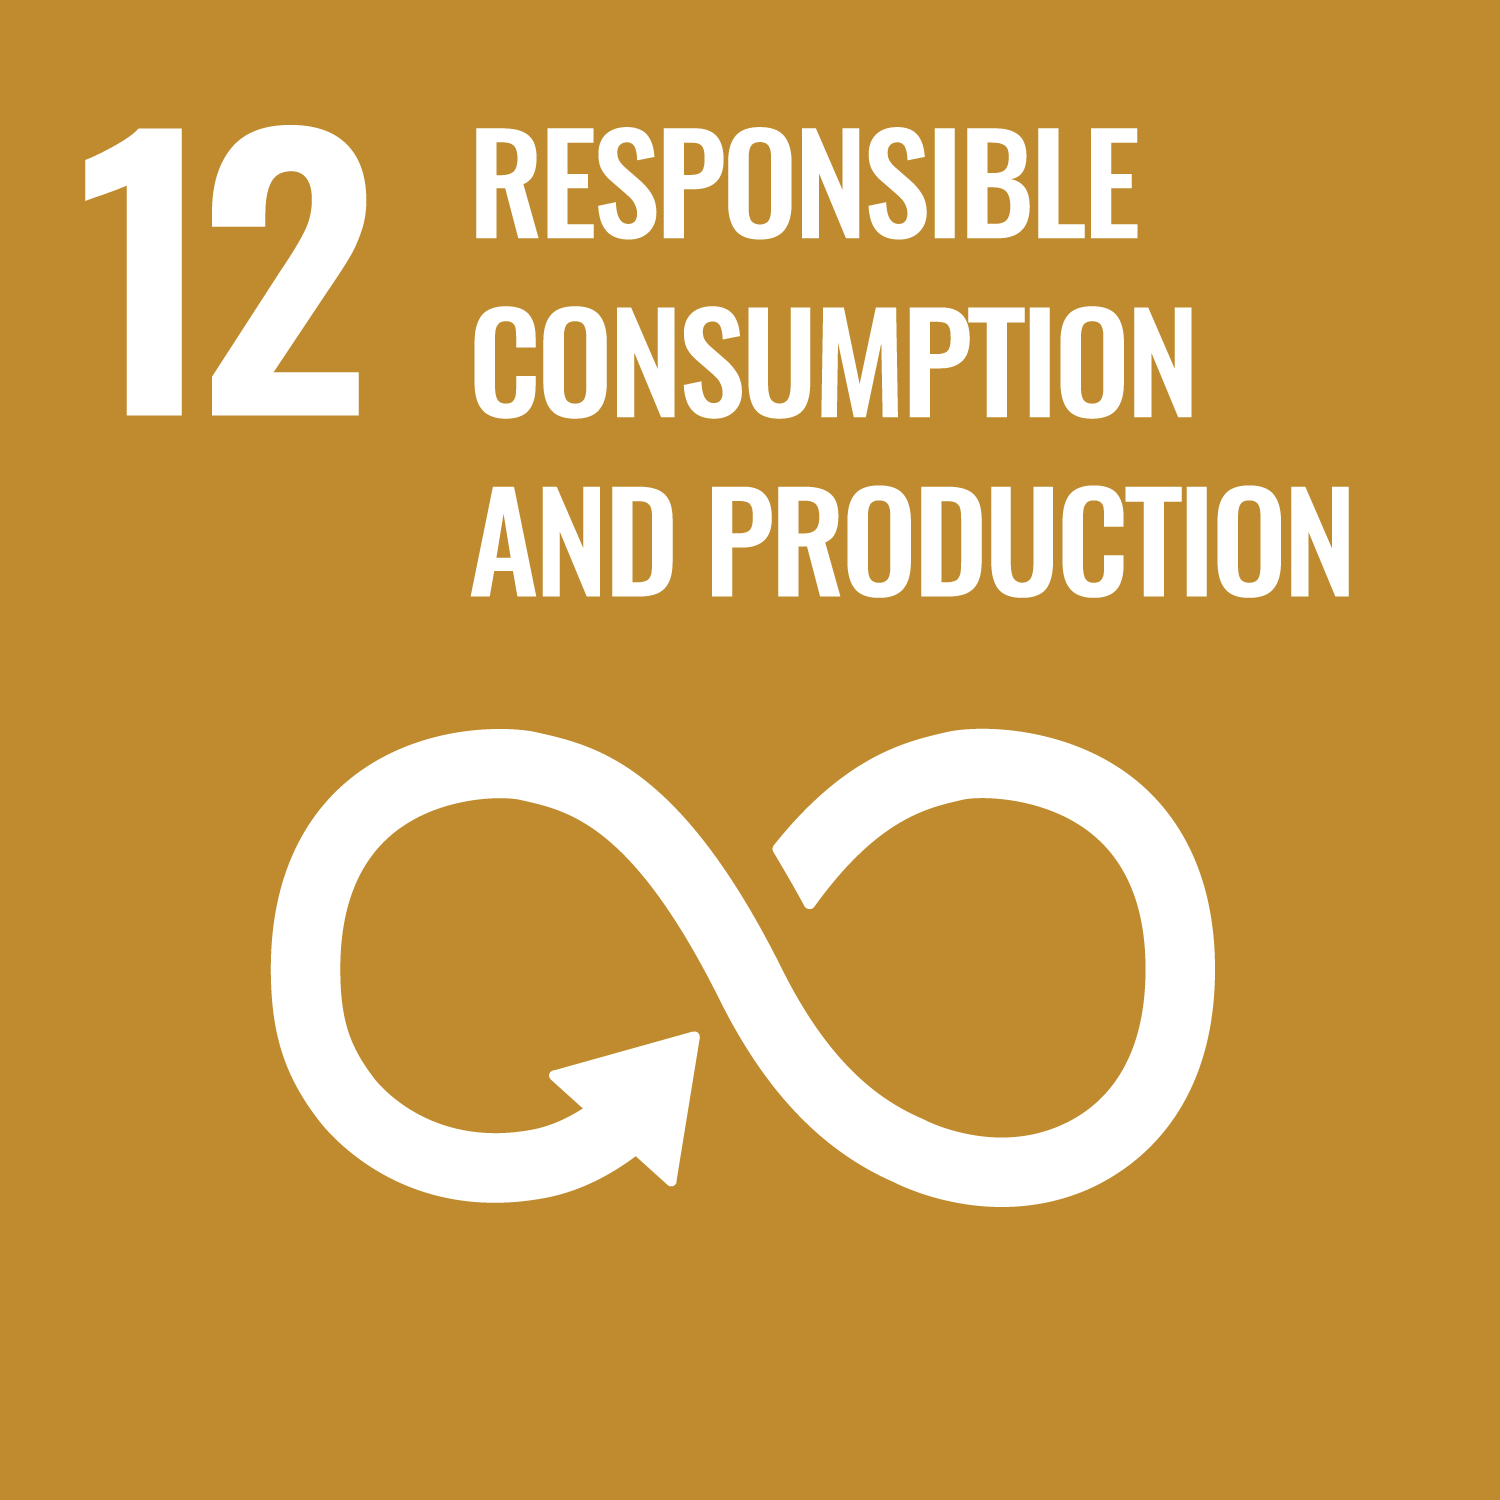 12｜RESPONSIBLE CONSUMPTION AND PRODUCTION